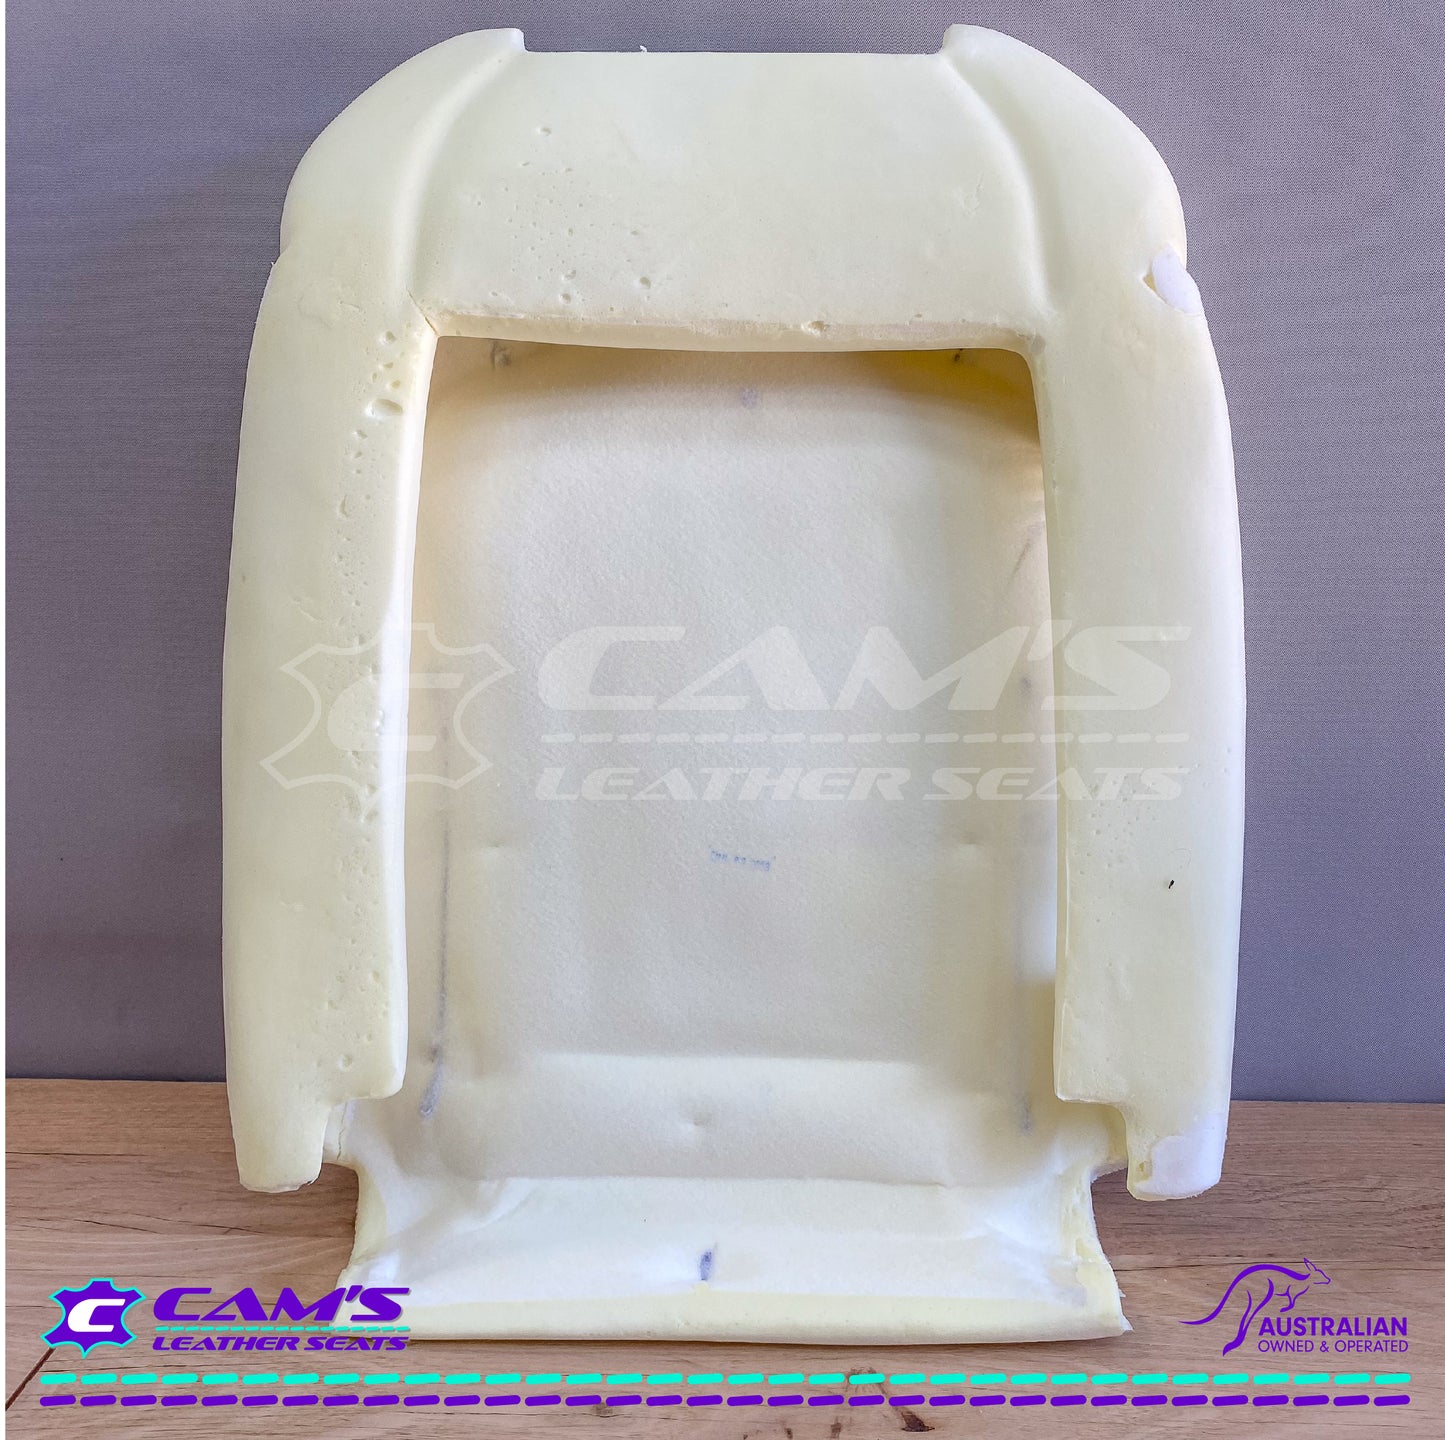 Foams Set for Holden HSV VF GTS CLUBSPORT style - 1 front seat foam upgrade - For pair buy 2